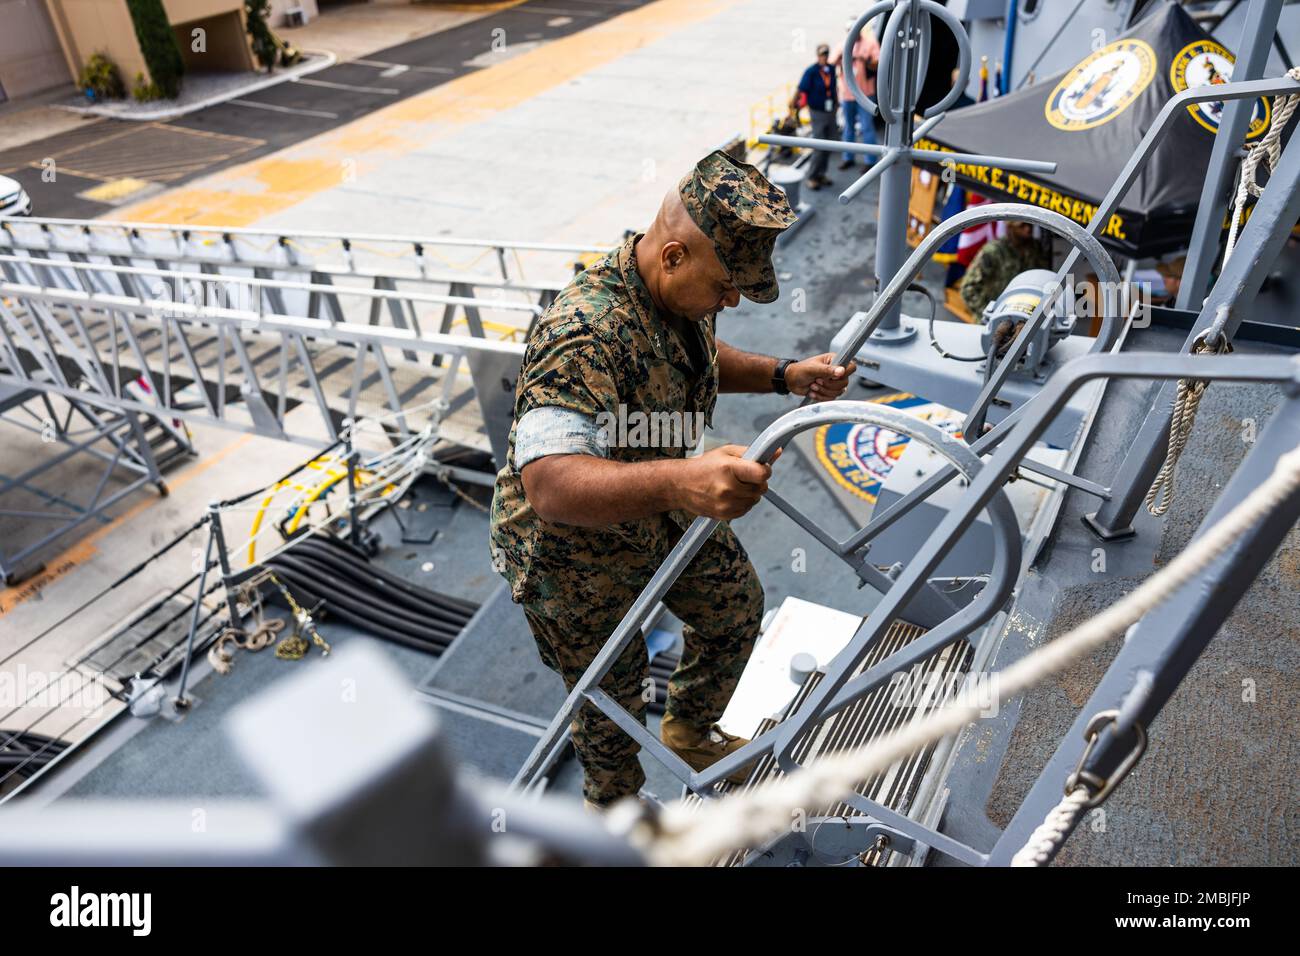 U.S. Marine Corps Maj. Gen. Brian Cavanaugh, commanding general, 1st Marine Aircraft Wing, tours the Arleigh Burke-class guided-missile destroyer USS Frank E. Petersen, Jr. (DDG 121), Joint Base Pearl Harbor-Hickam, Hawaii, June 16, 2022. The USS Frank E. Petersen, Jr. is named after retired U.S. Marine Corps Lt. Gen. Frank E. Petersen, Jr., who was the first Black U.S. Marine Corps aviator and the first Black Marine to become a three-star general. Stock Photo